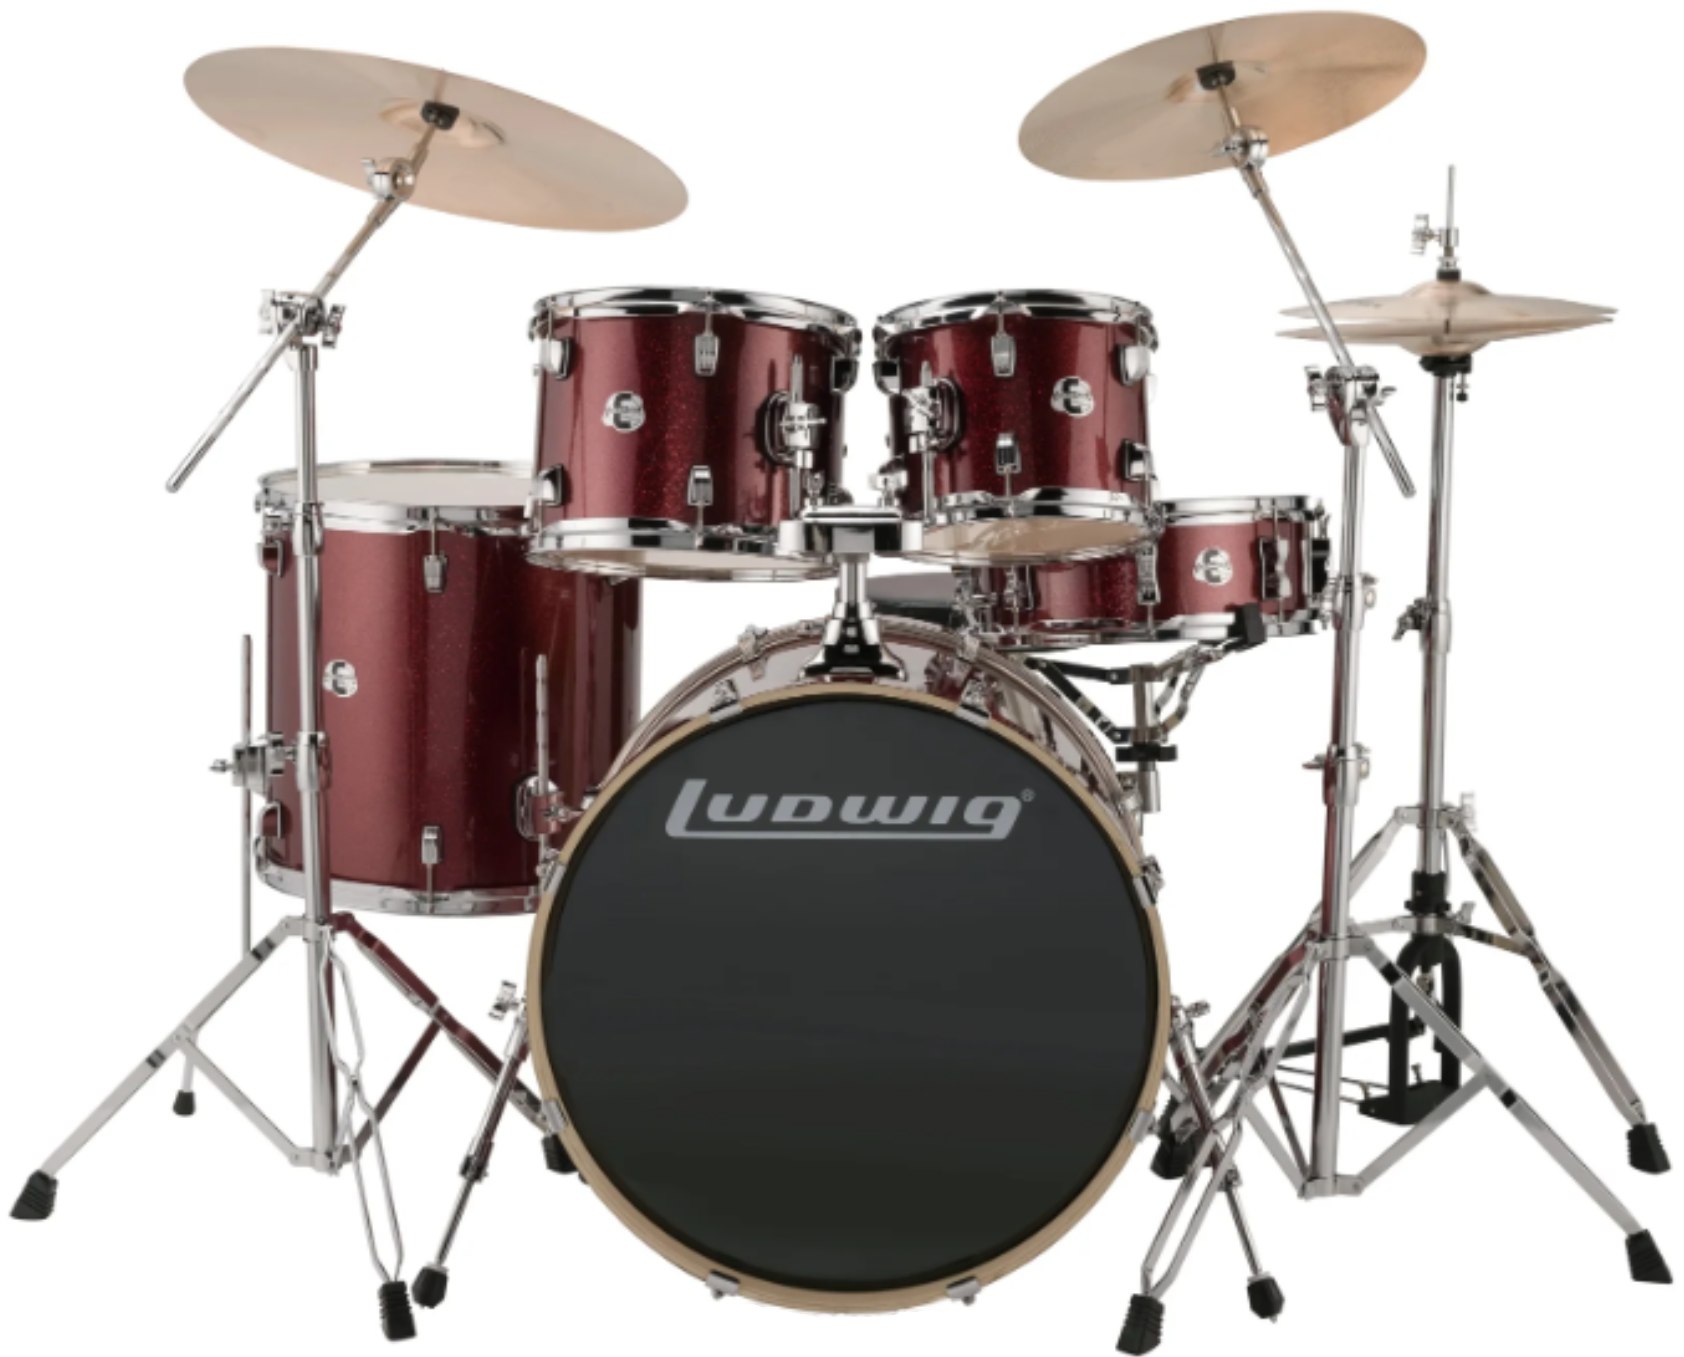 Trống Jazz Ludwig Element Evolution LCEE22025 Wine Red Sparkle